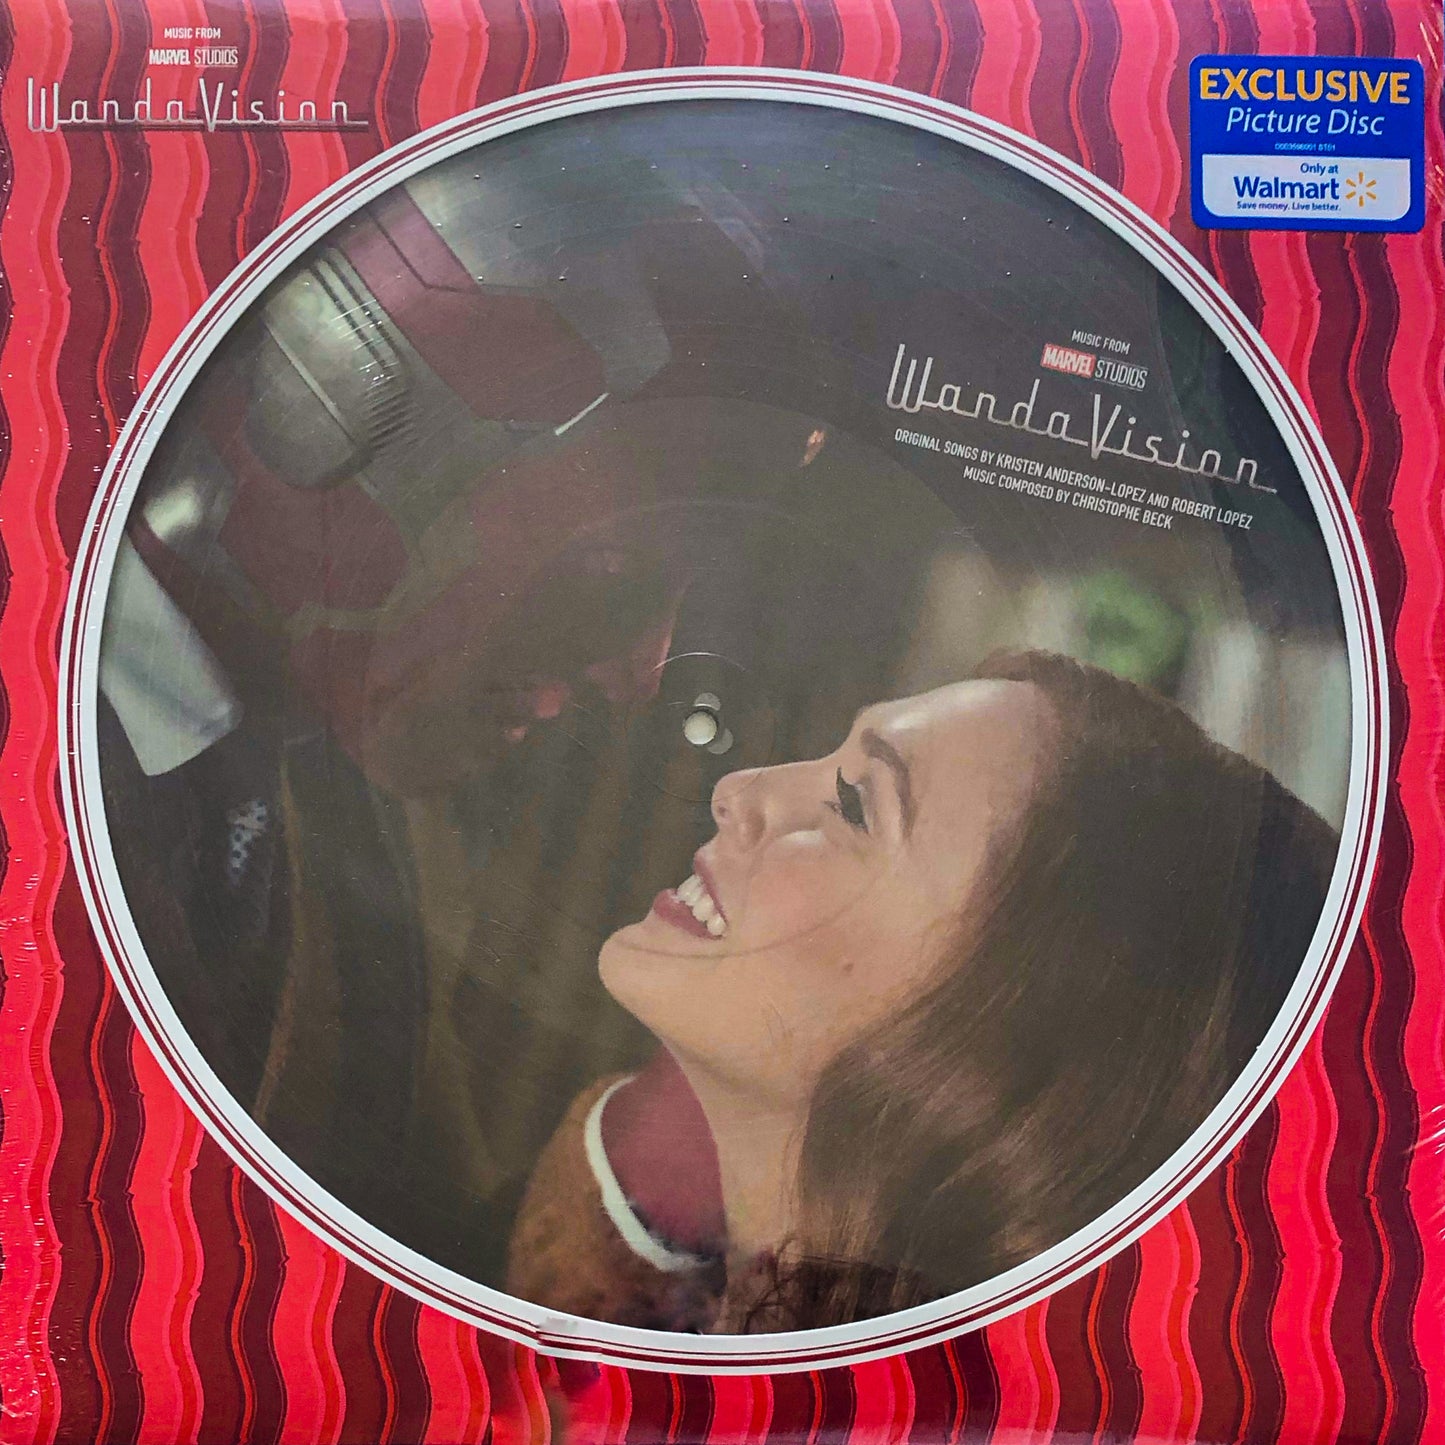 Music From WandaVision (Limited Edition Picture Disc Vinyl)